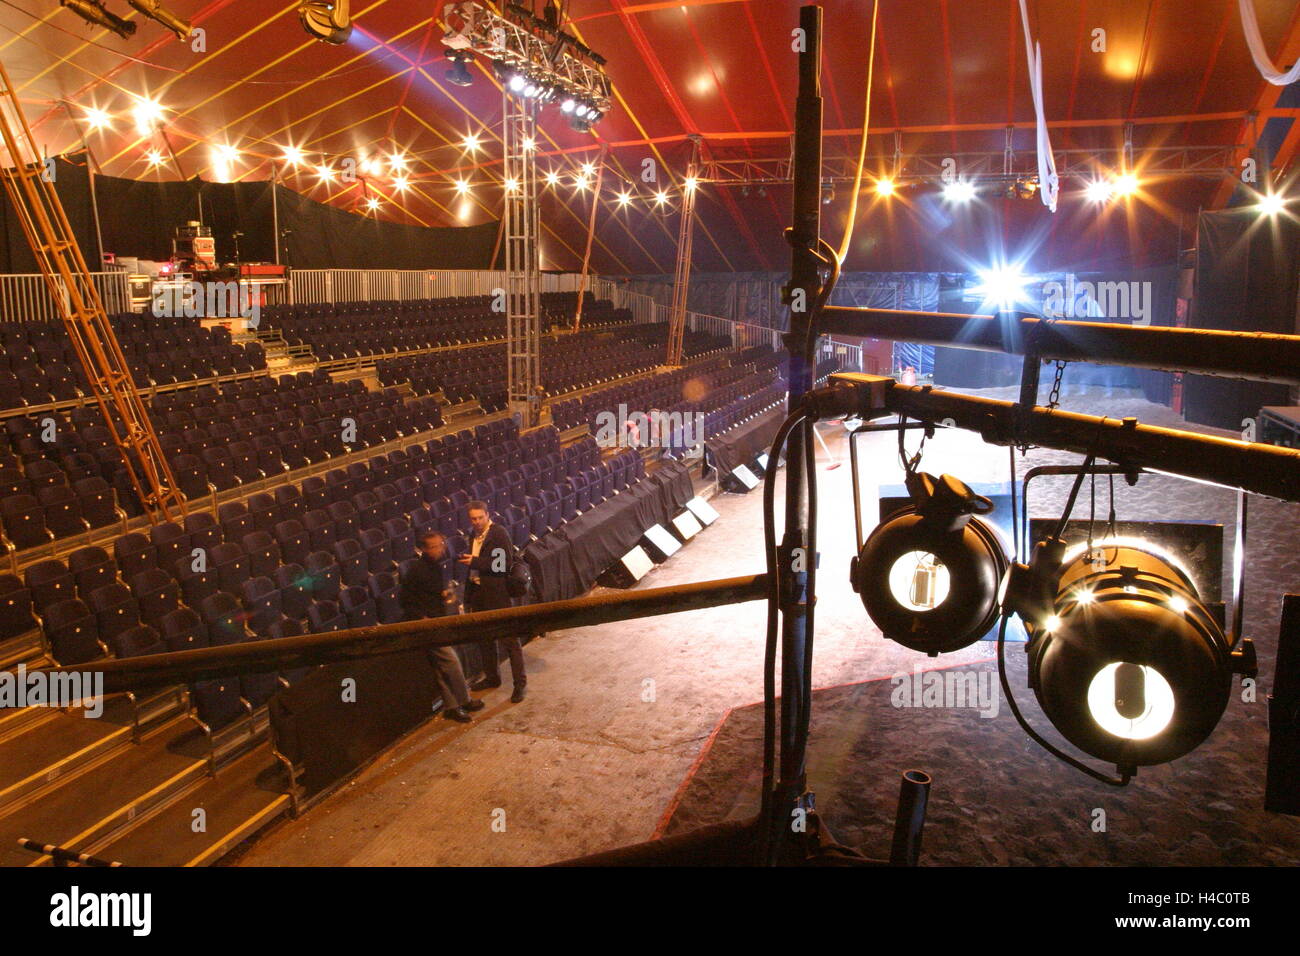 Interior of a newly erected circus-style tent showing sand performance area, tiered seating and spotlights in the foreground Stock Photo